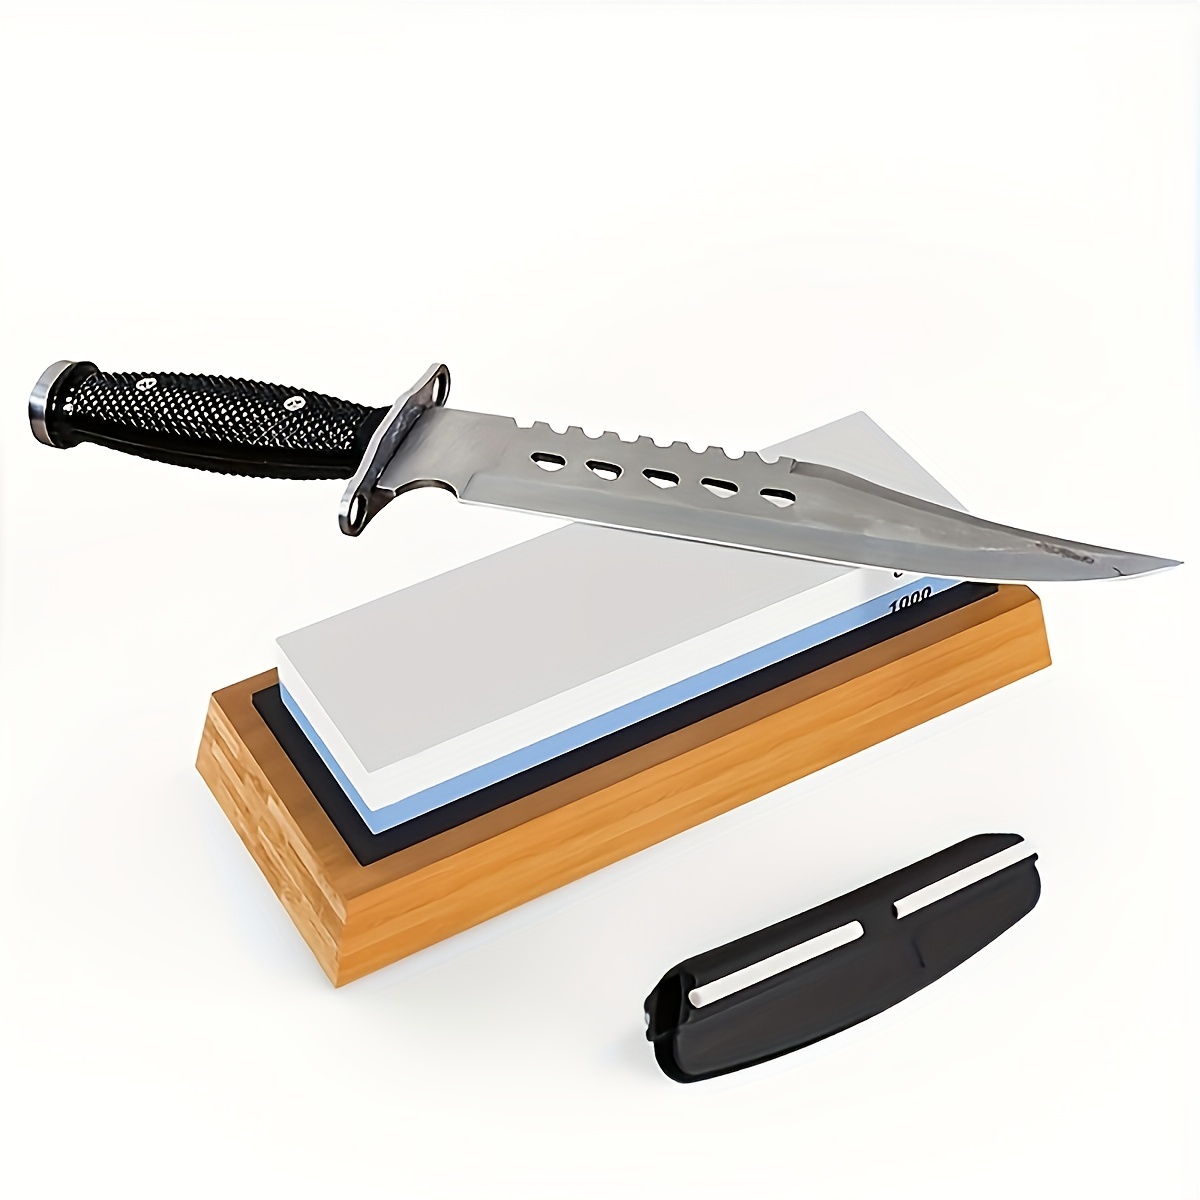 1000/6000 Sword Sharpening Stone - Knife Accessories at